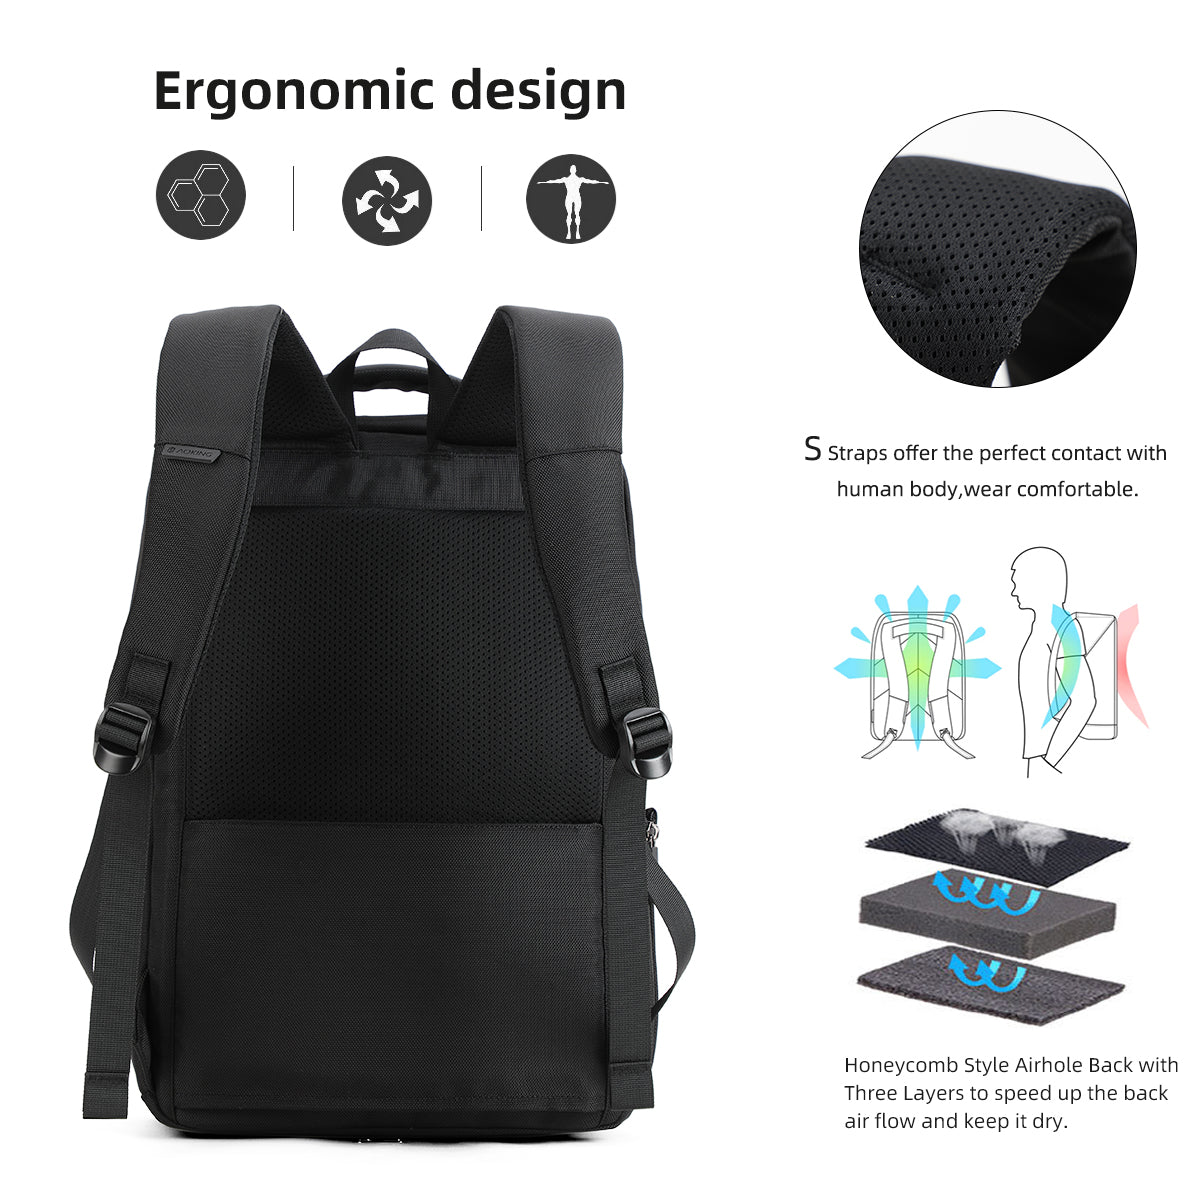 AOKING SPINE PROTECTION TRAVEL LAPTOP BACKPACK - SN1290